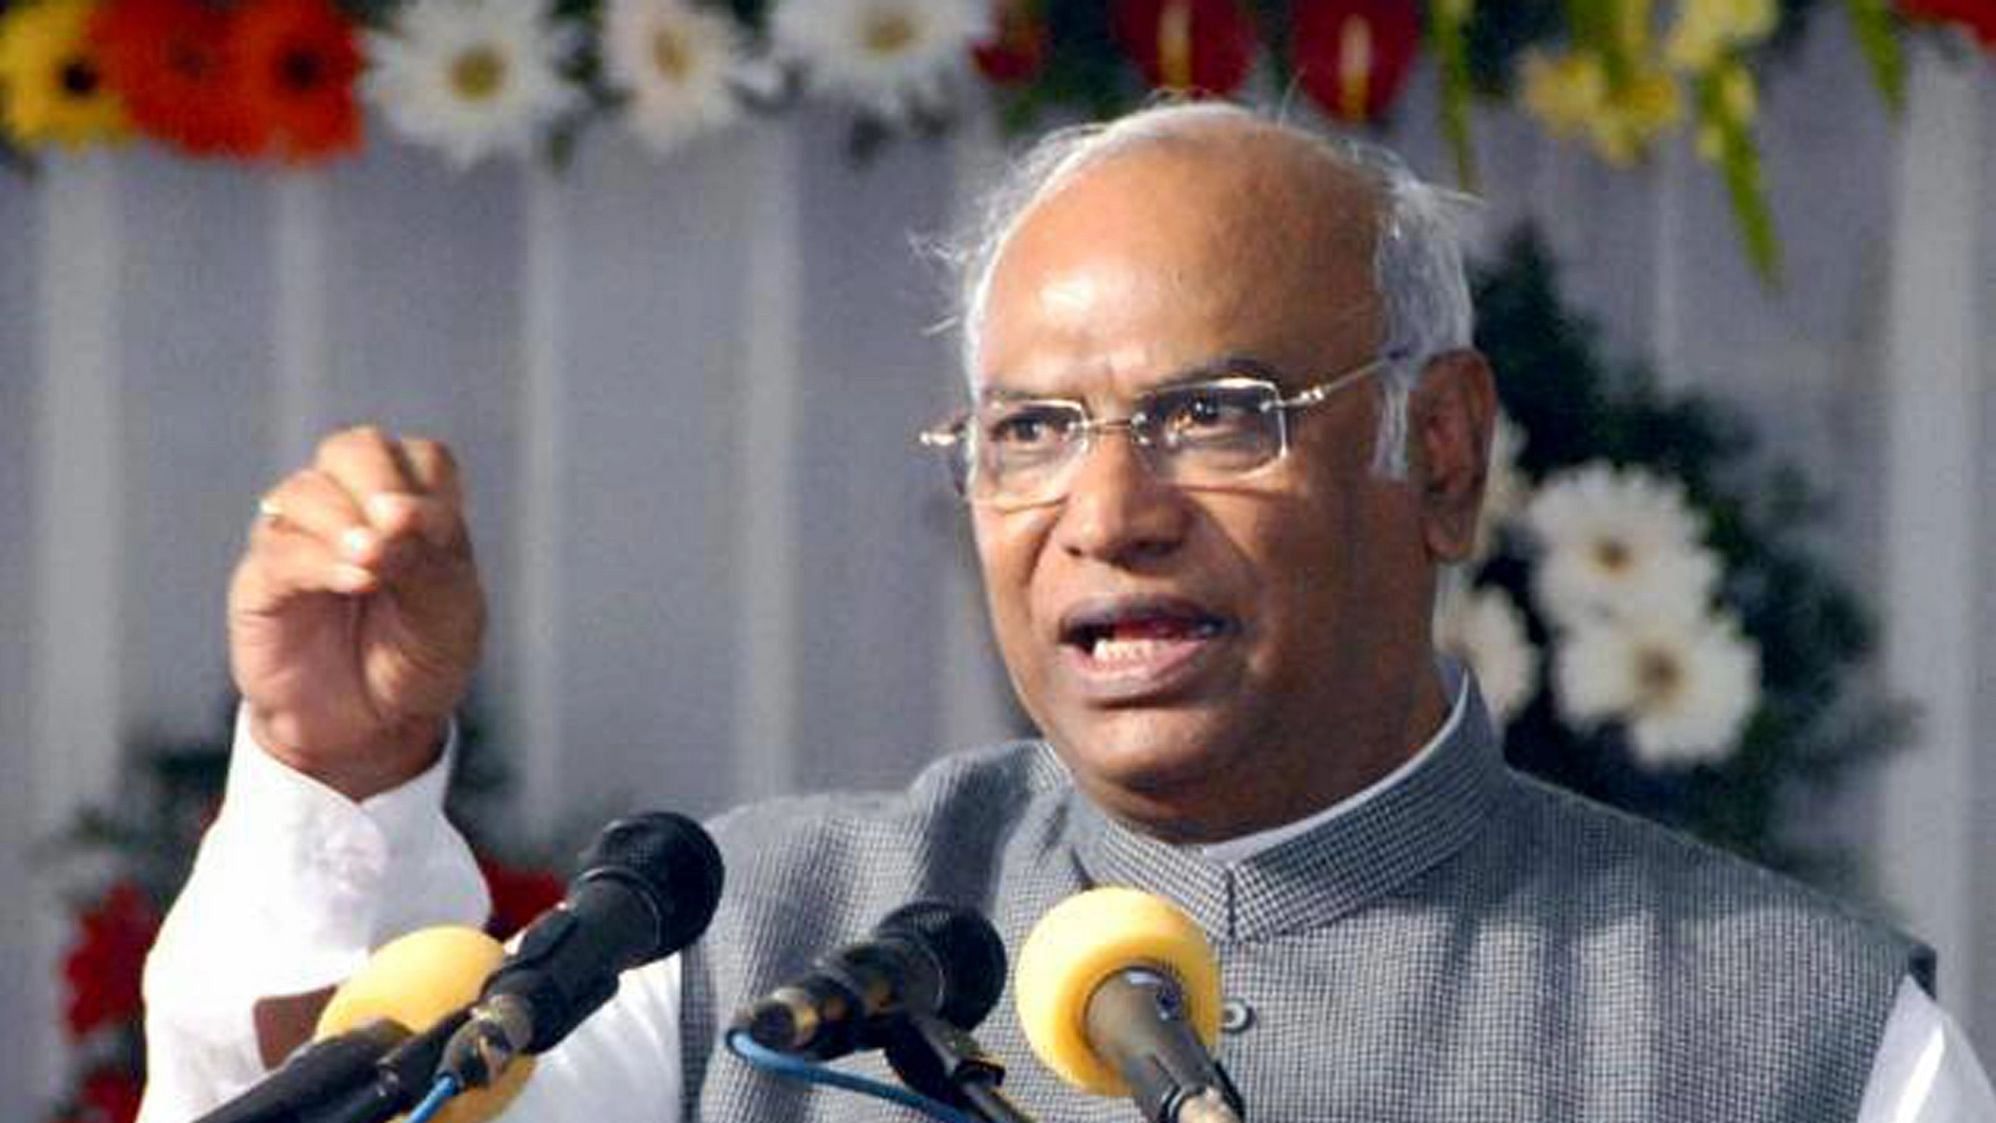 The Congress has submitted to the Rajya Sabha Chairman the name of Mallikarjun Kharge as the new Leader of Opposition in the House.